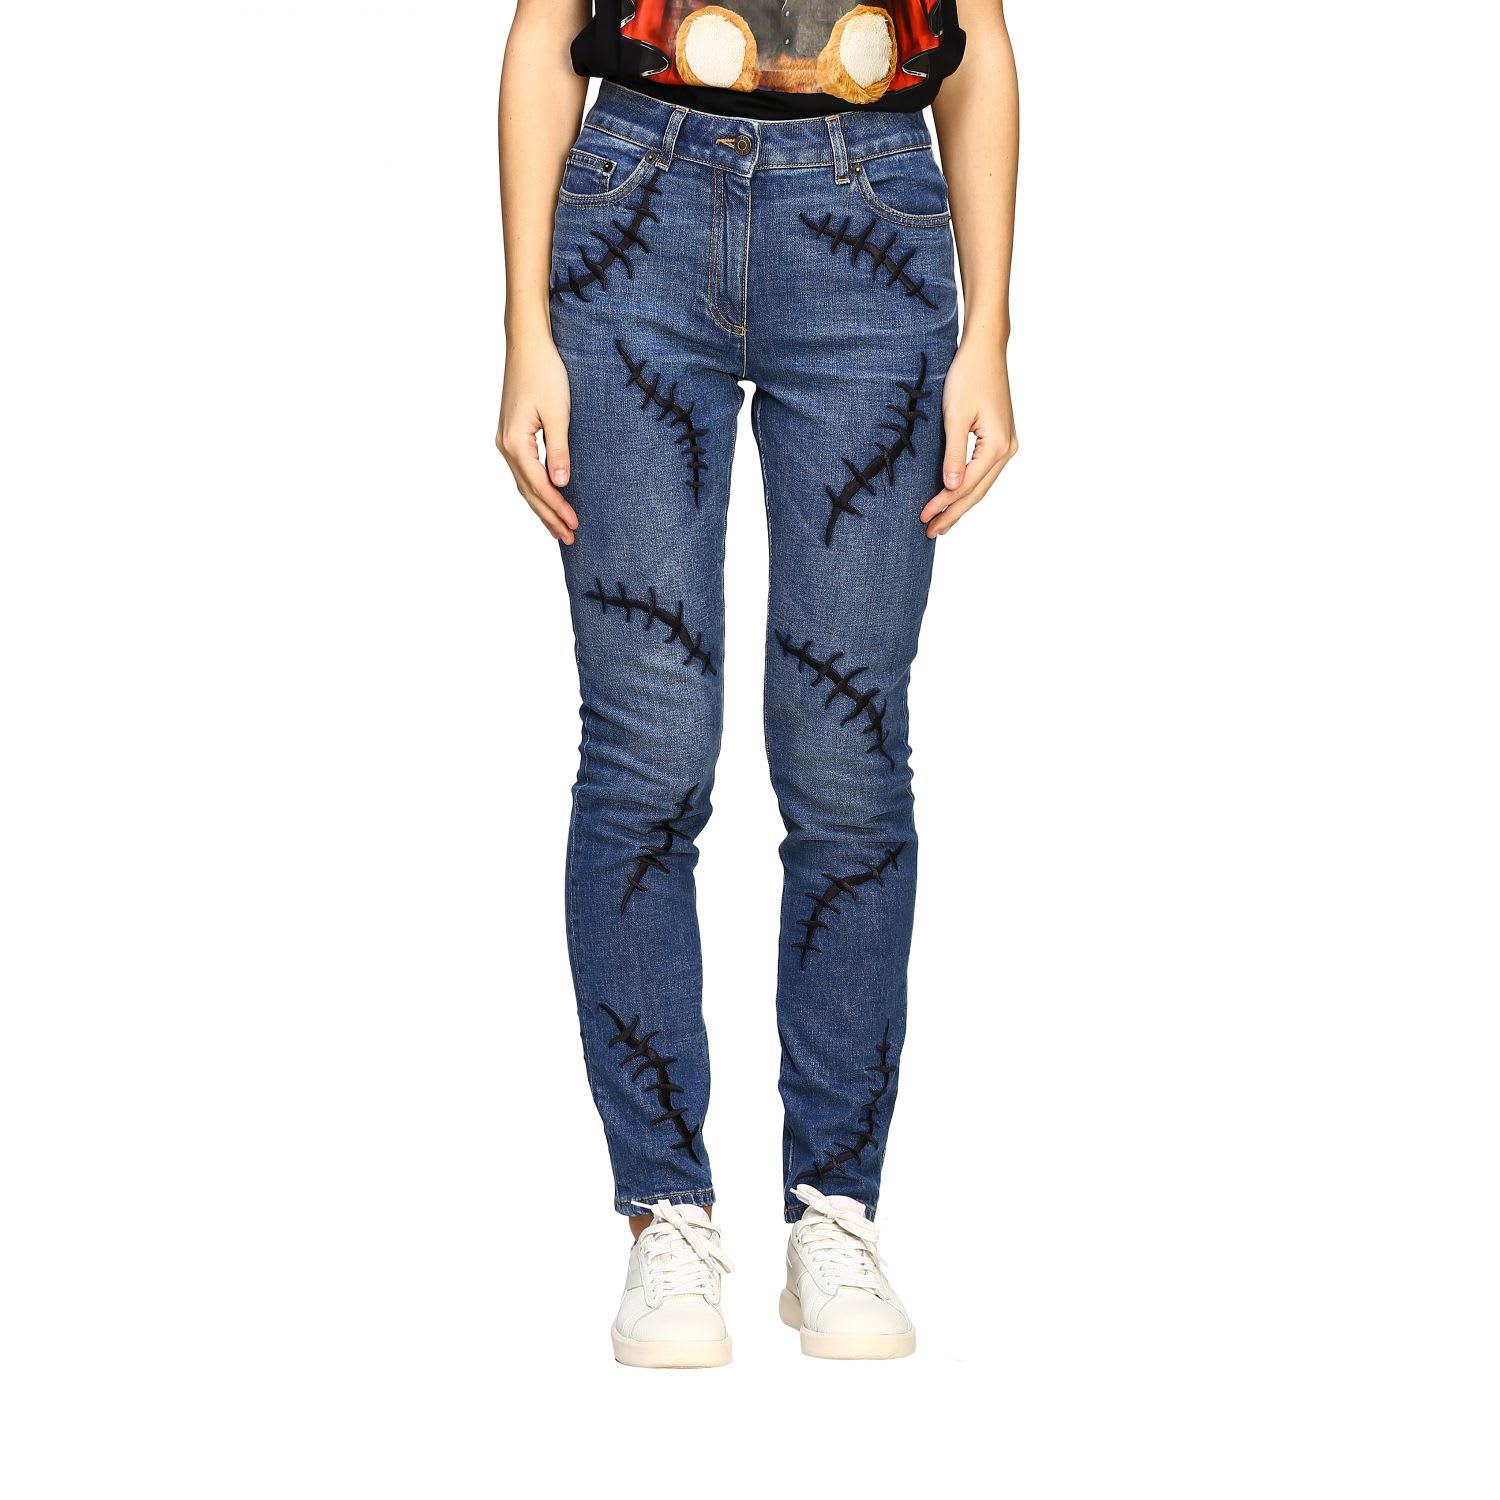 MOSCHINO COUTURE SLIM FIT JEANS WITH EMBROIDERED SCARS,11211161